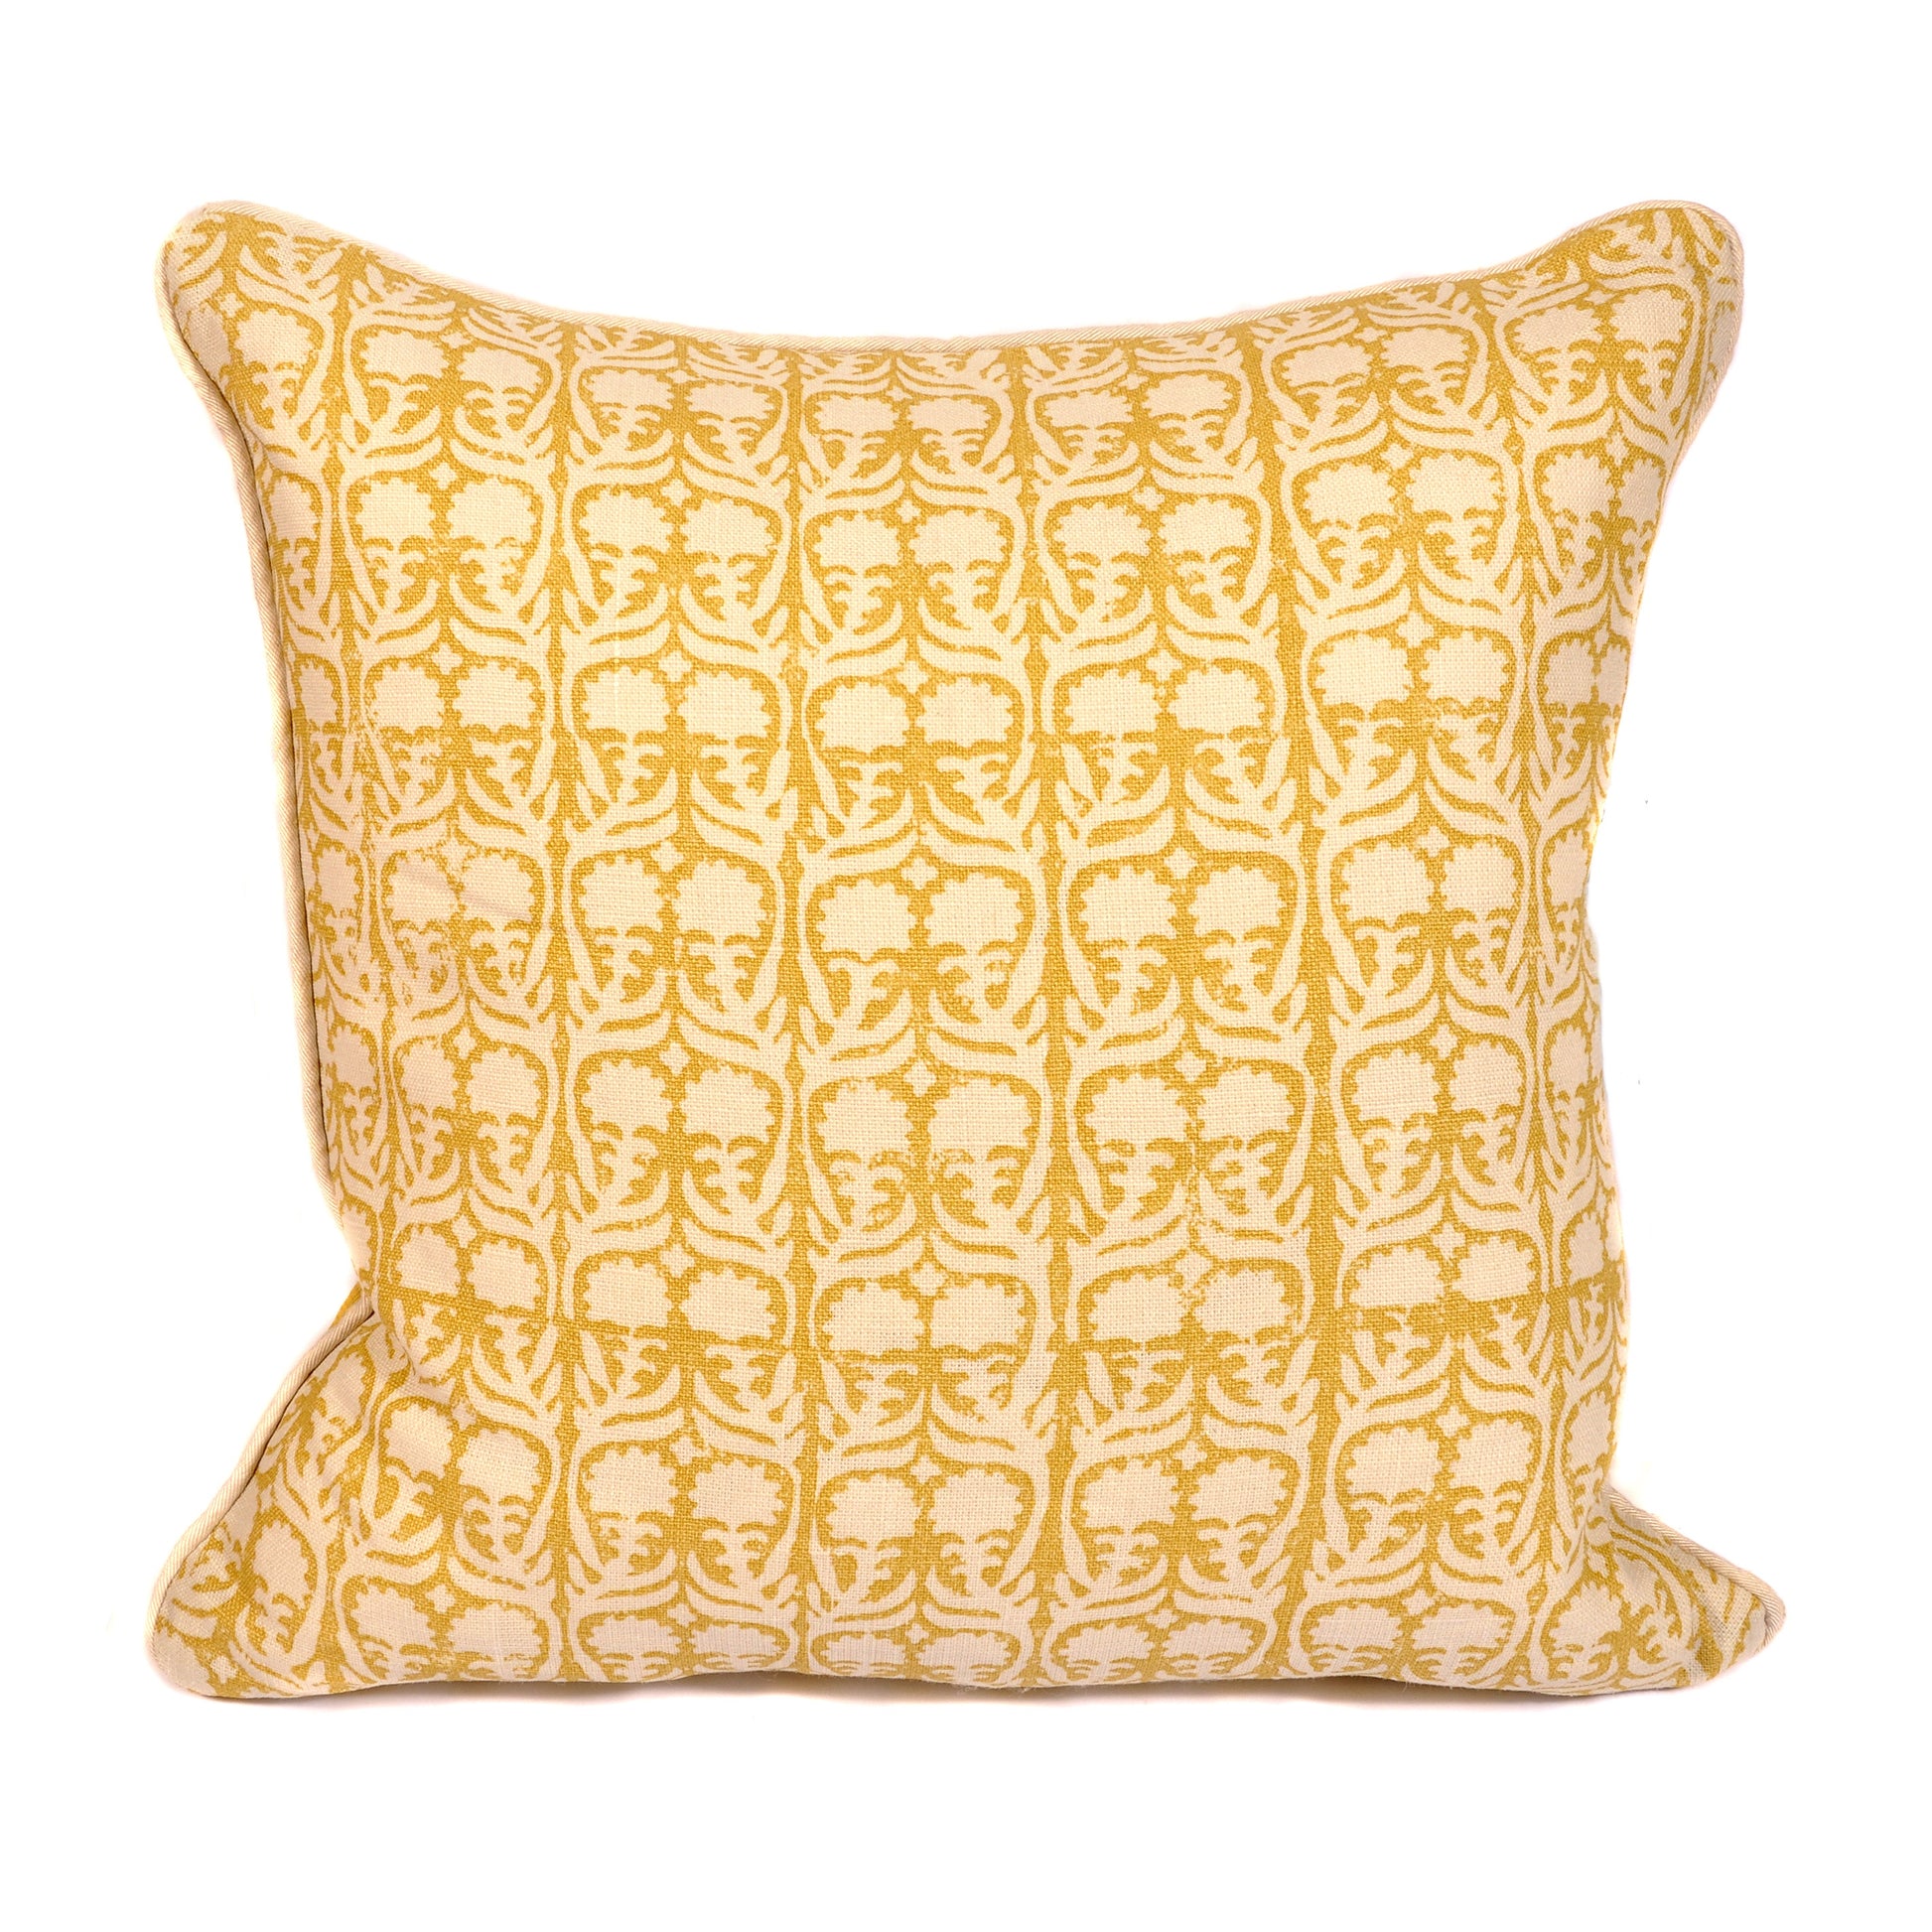 Ochre Floral Linen Cushion with Check Silk Back Not specified